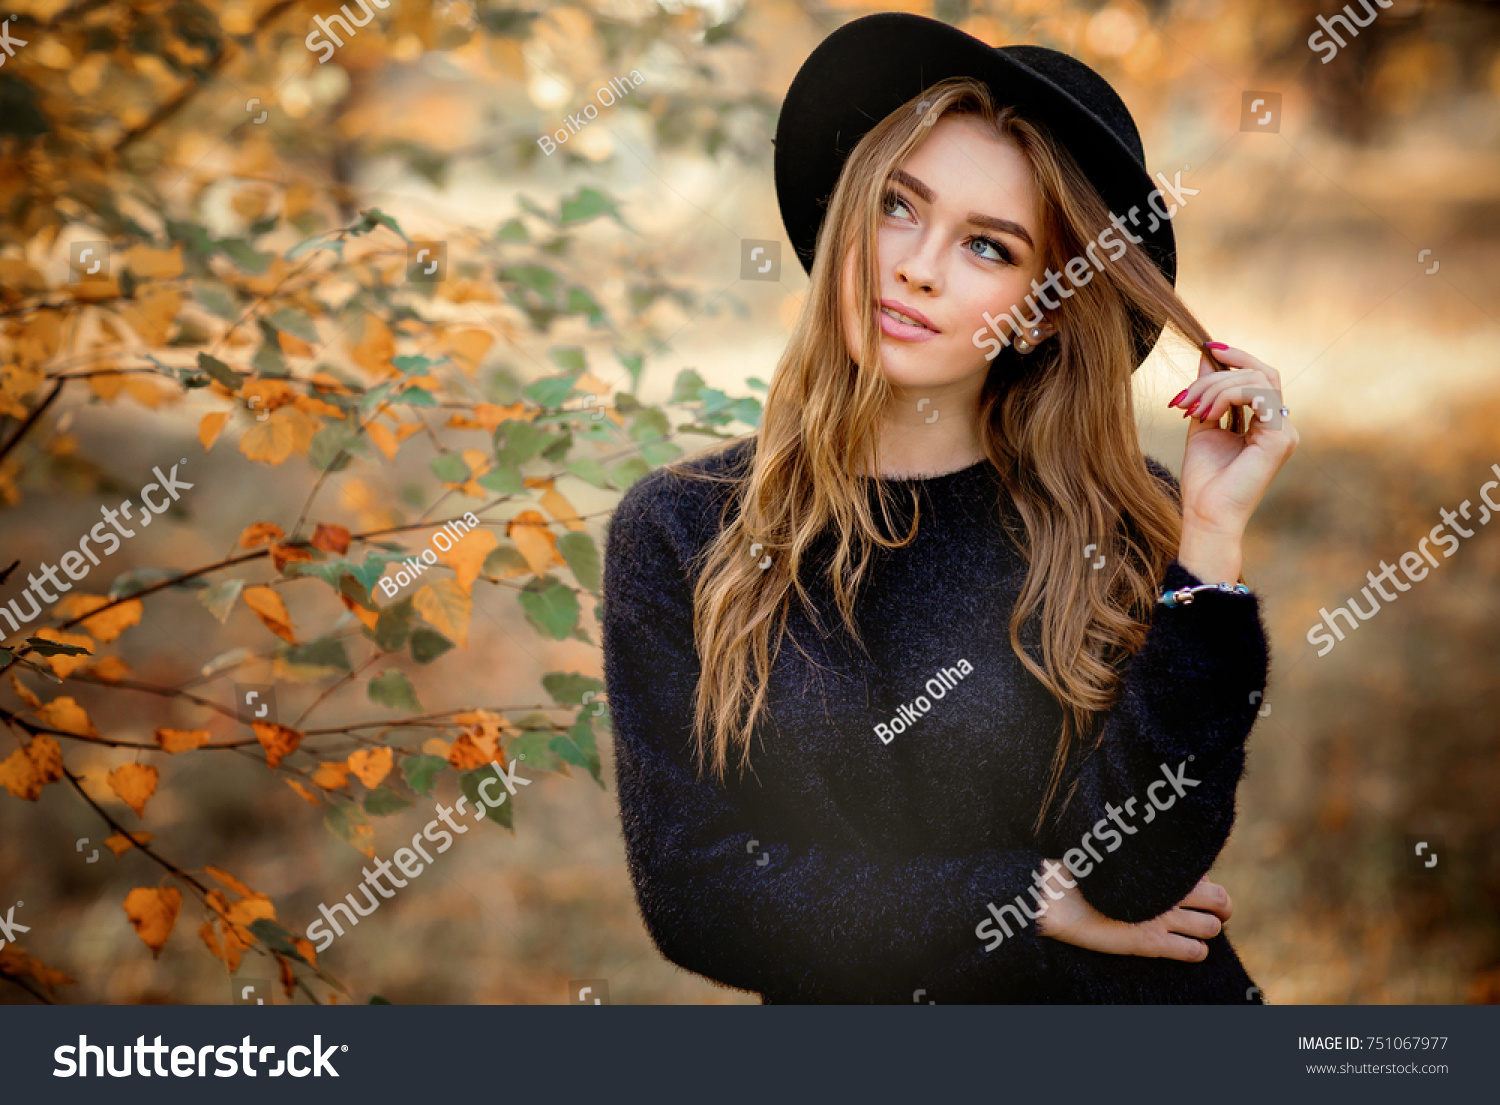 Autumn Image with Woman